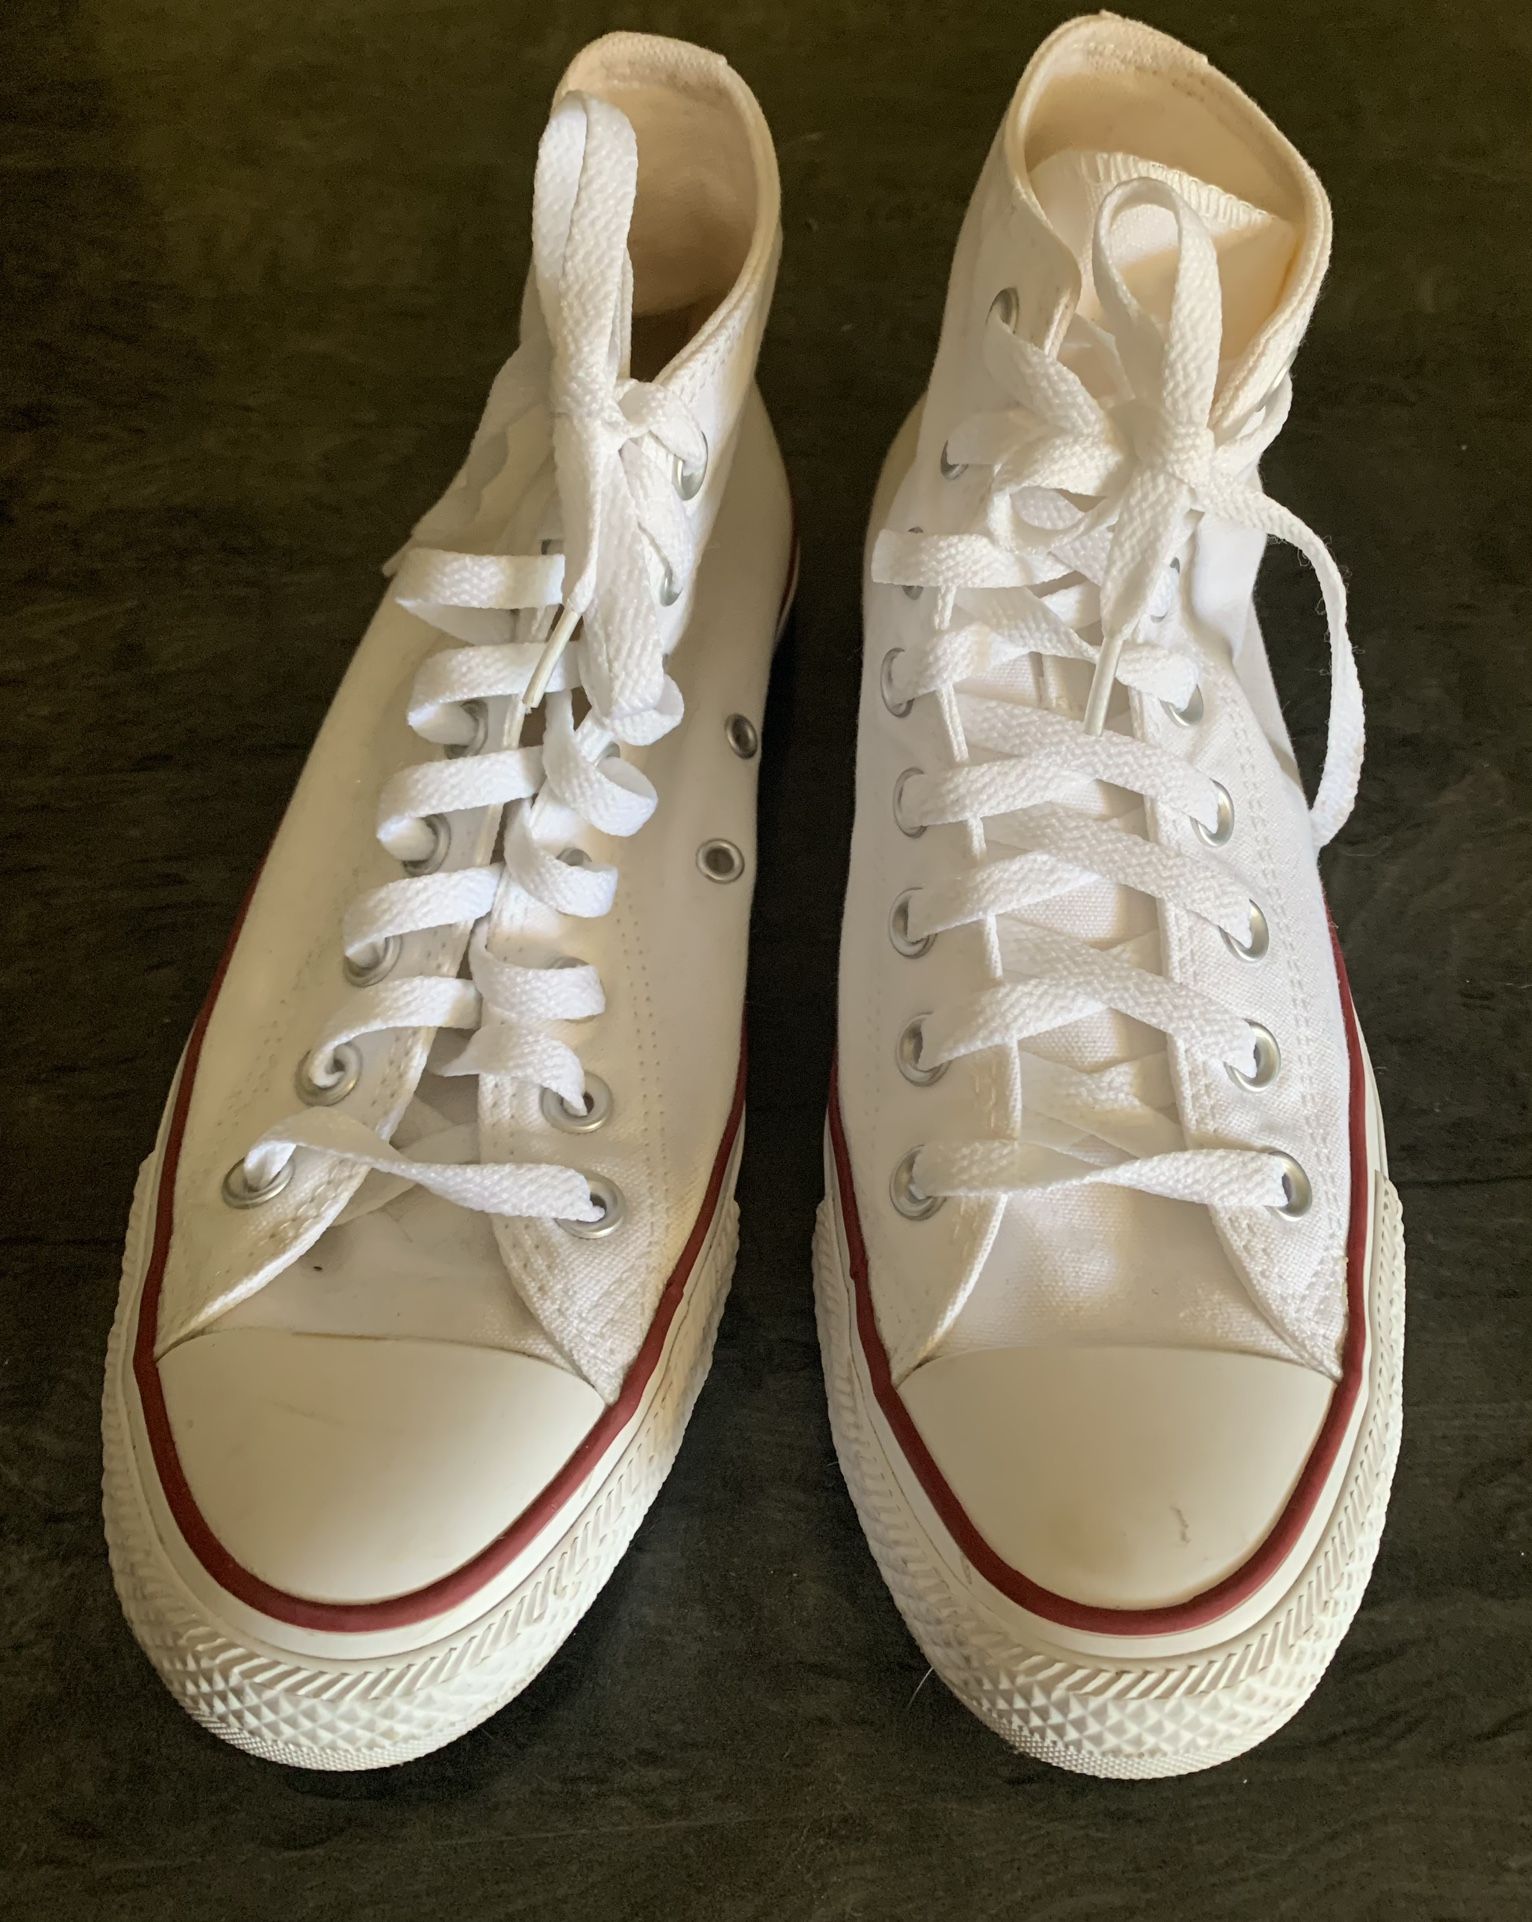 Converse All Star Women’s Shoes Size 8.5